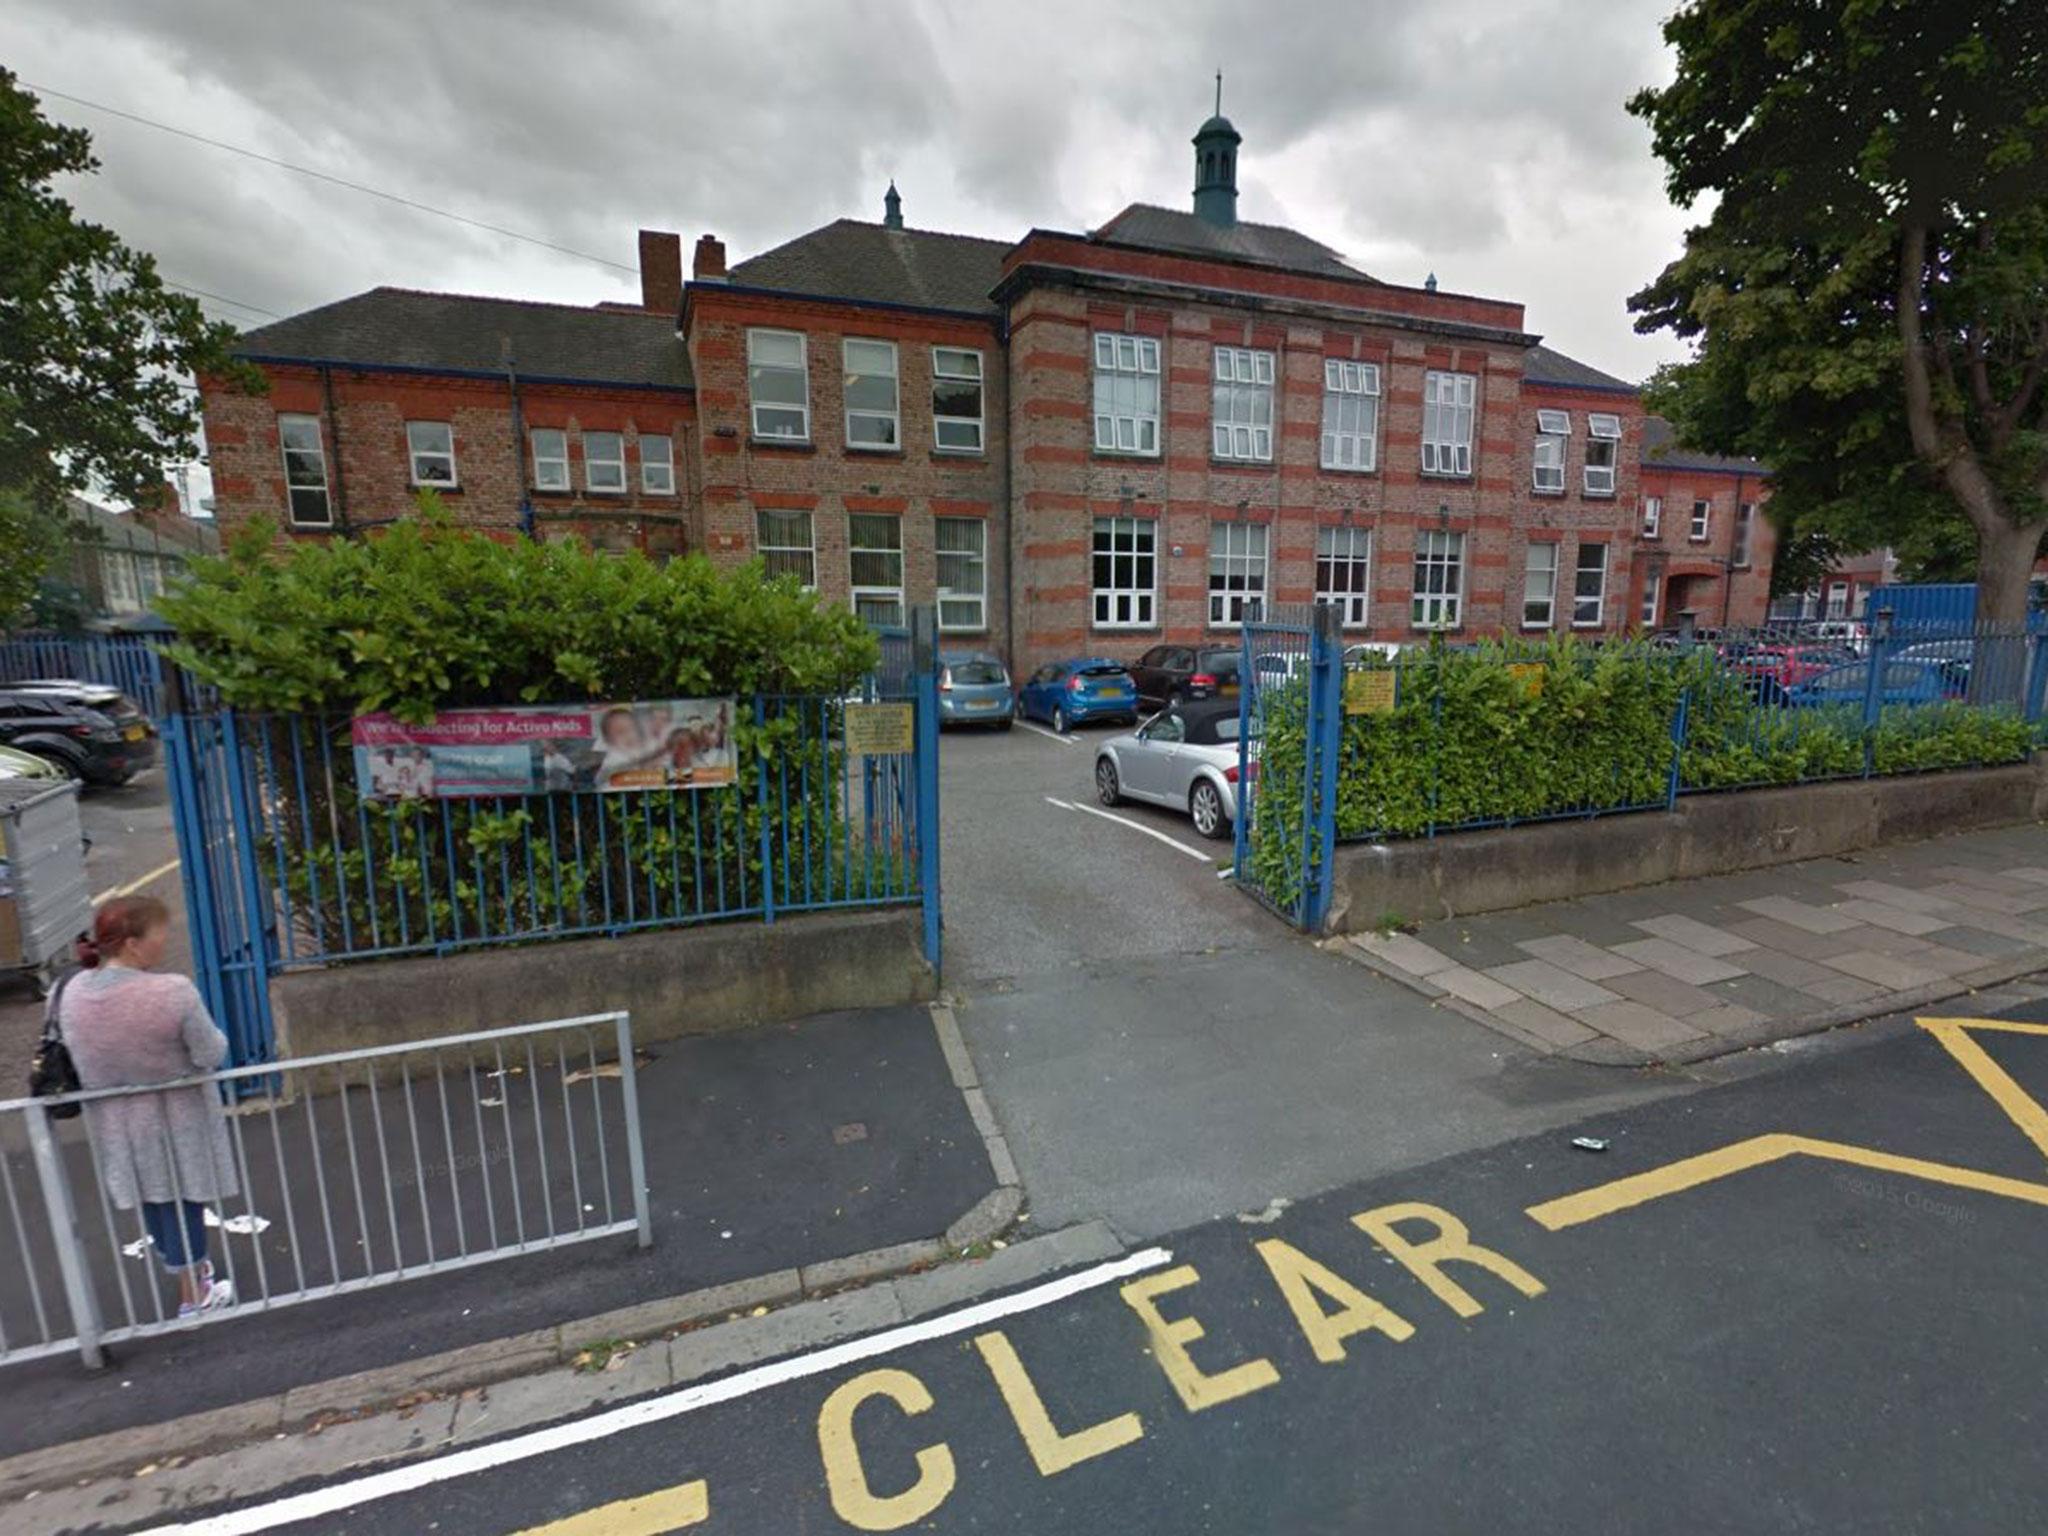 Devonshire Park Primary School was evacuated after the attack